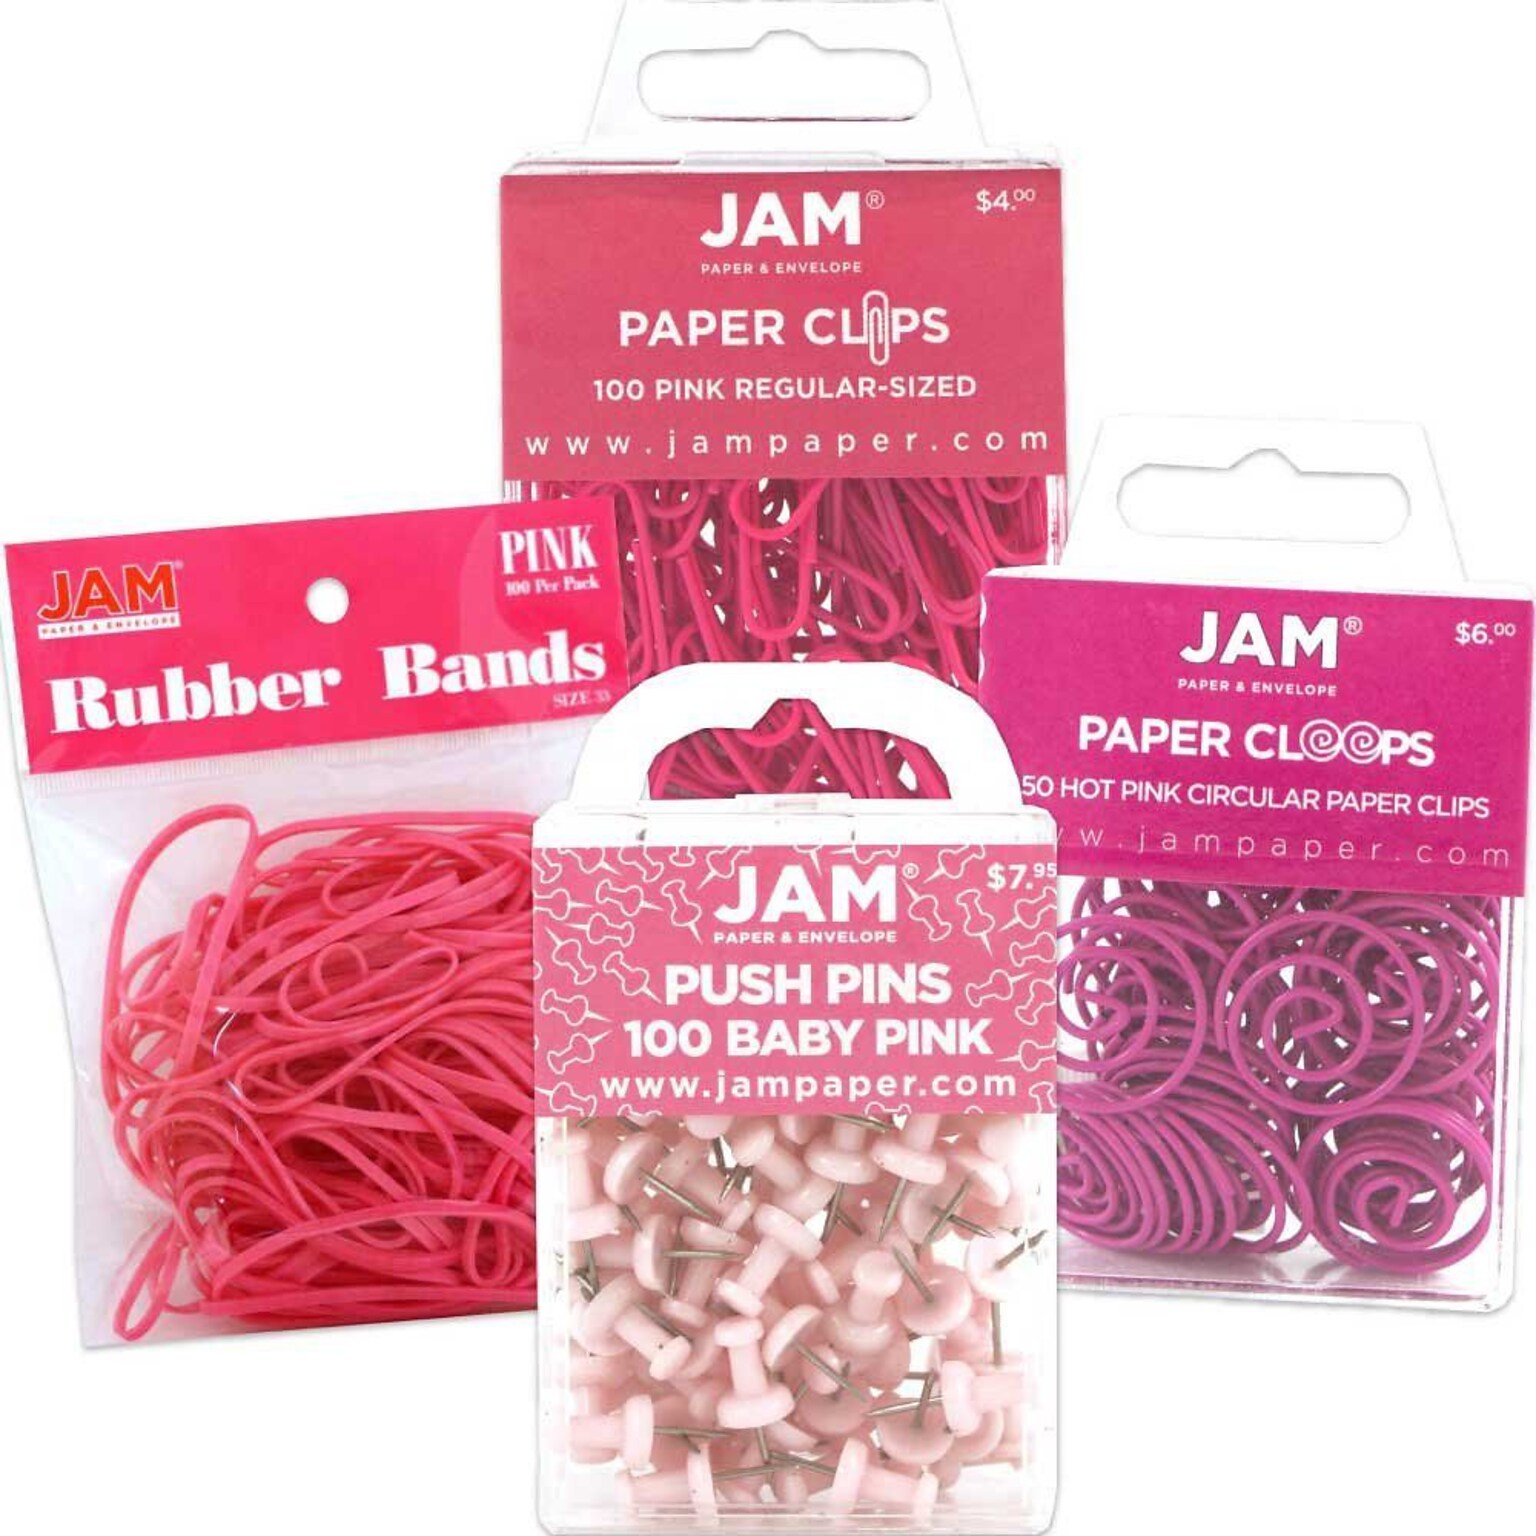 JAM Paper® Office Supply Assortment, Pink, 1 Rubber Bands, 1 Push Pins, 1 Paper Clips & 1 Round Paper Cloops (3224PIOASRT)